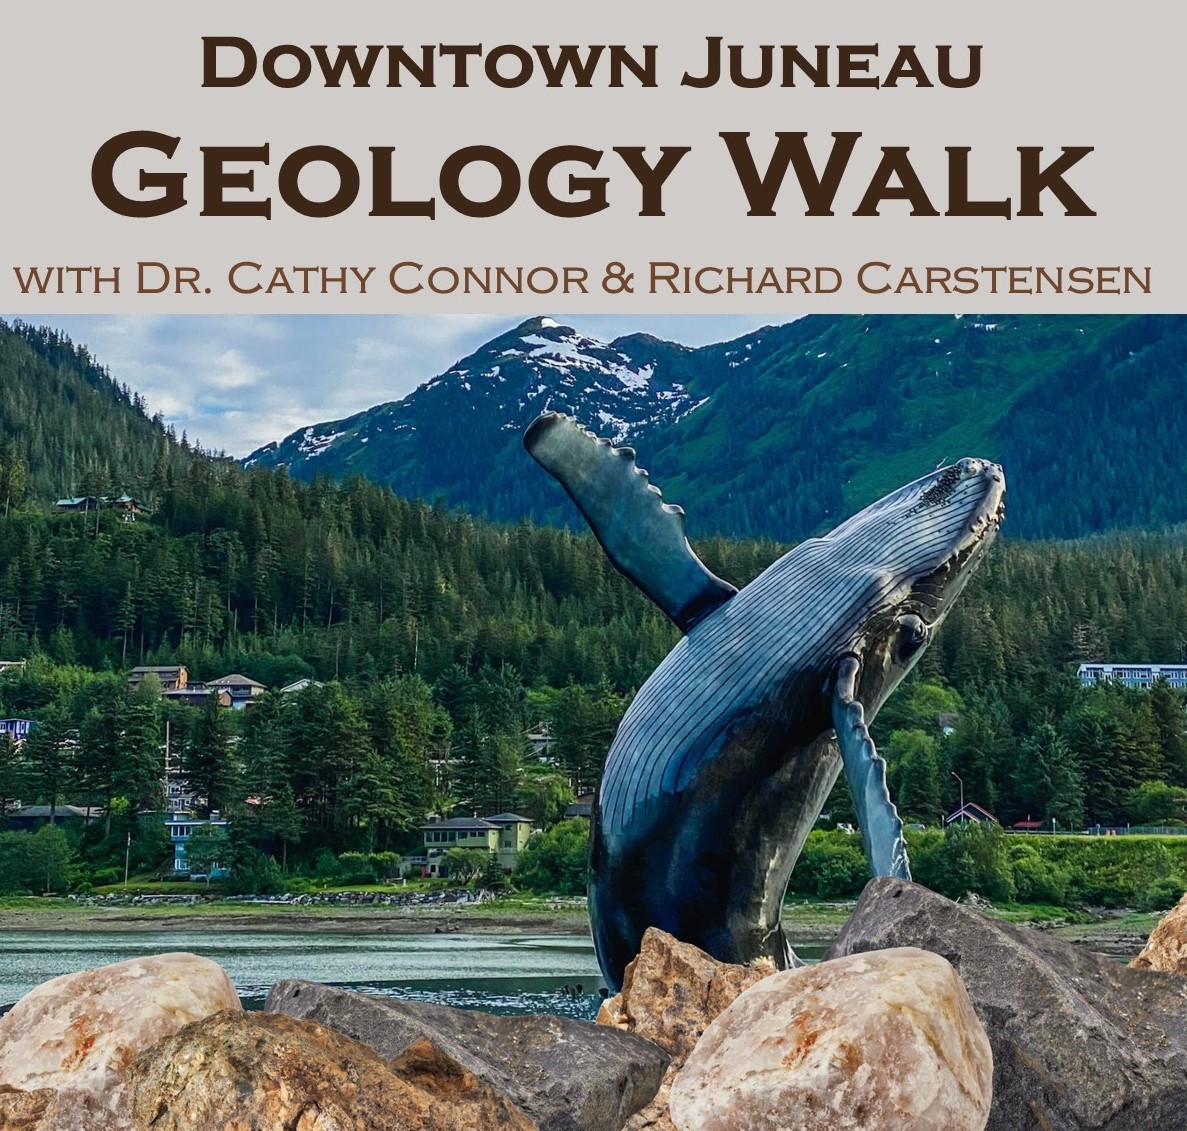 Geology Walk: A geological tour of downtown Juneau. Saturday, May 18th 1-3pm